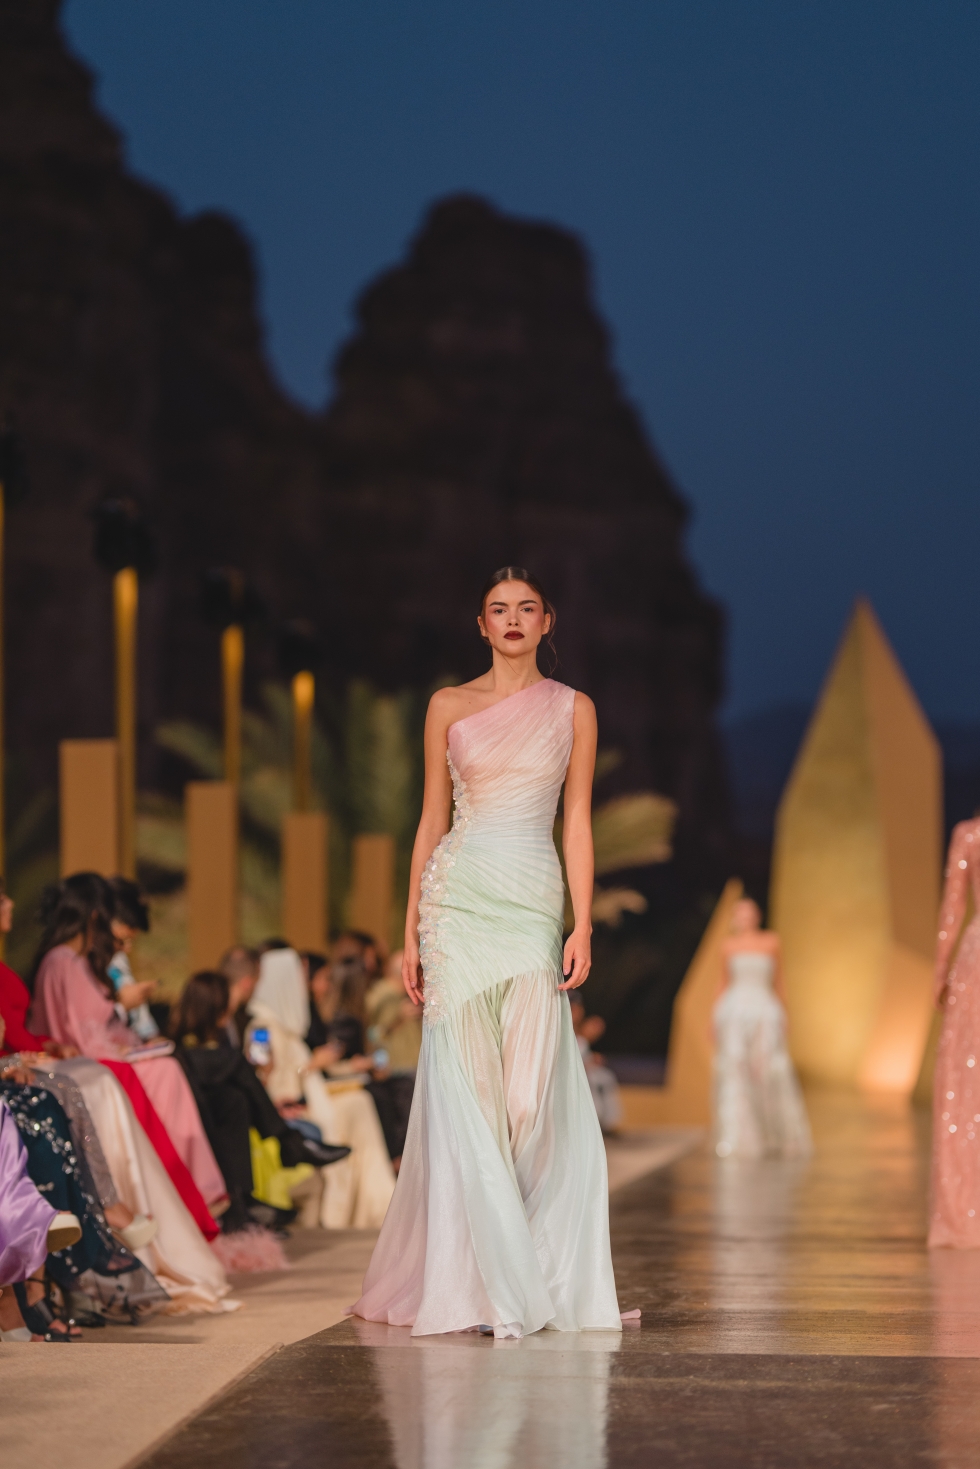 Maison Rami Kadi Unveils “Les Miroirs” Collection in a Breathtaking Show at AlUla